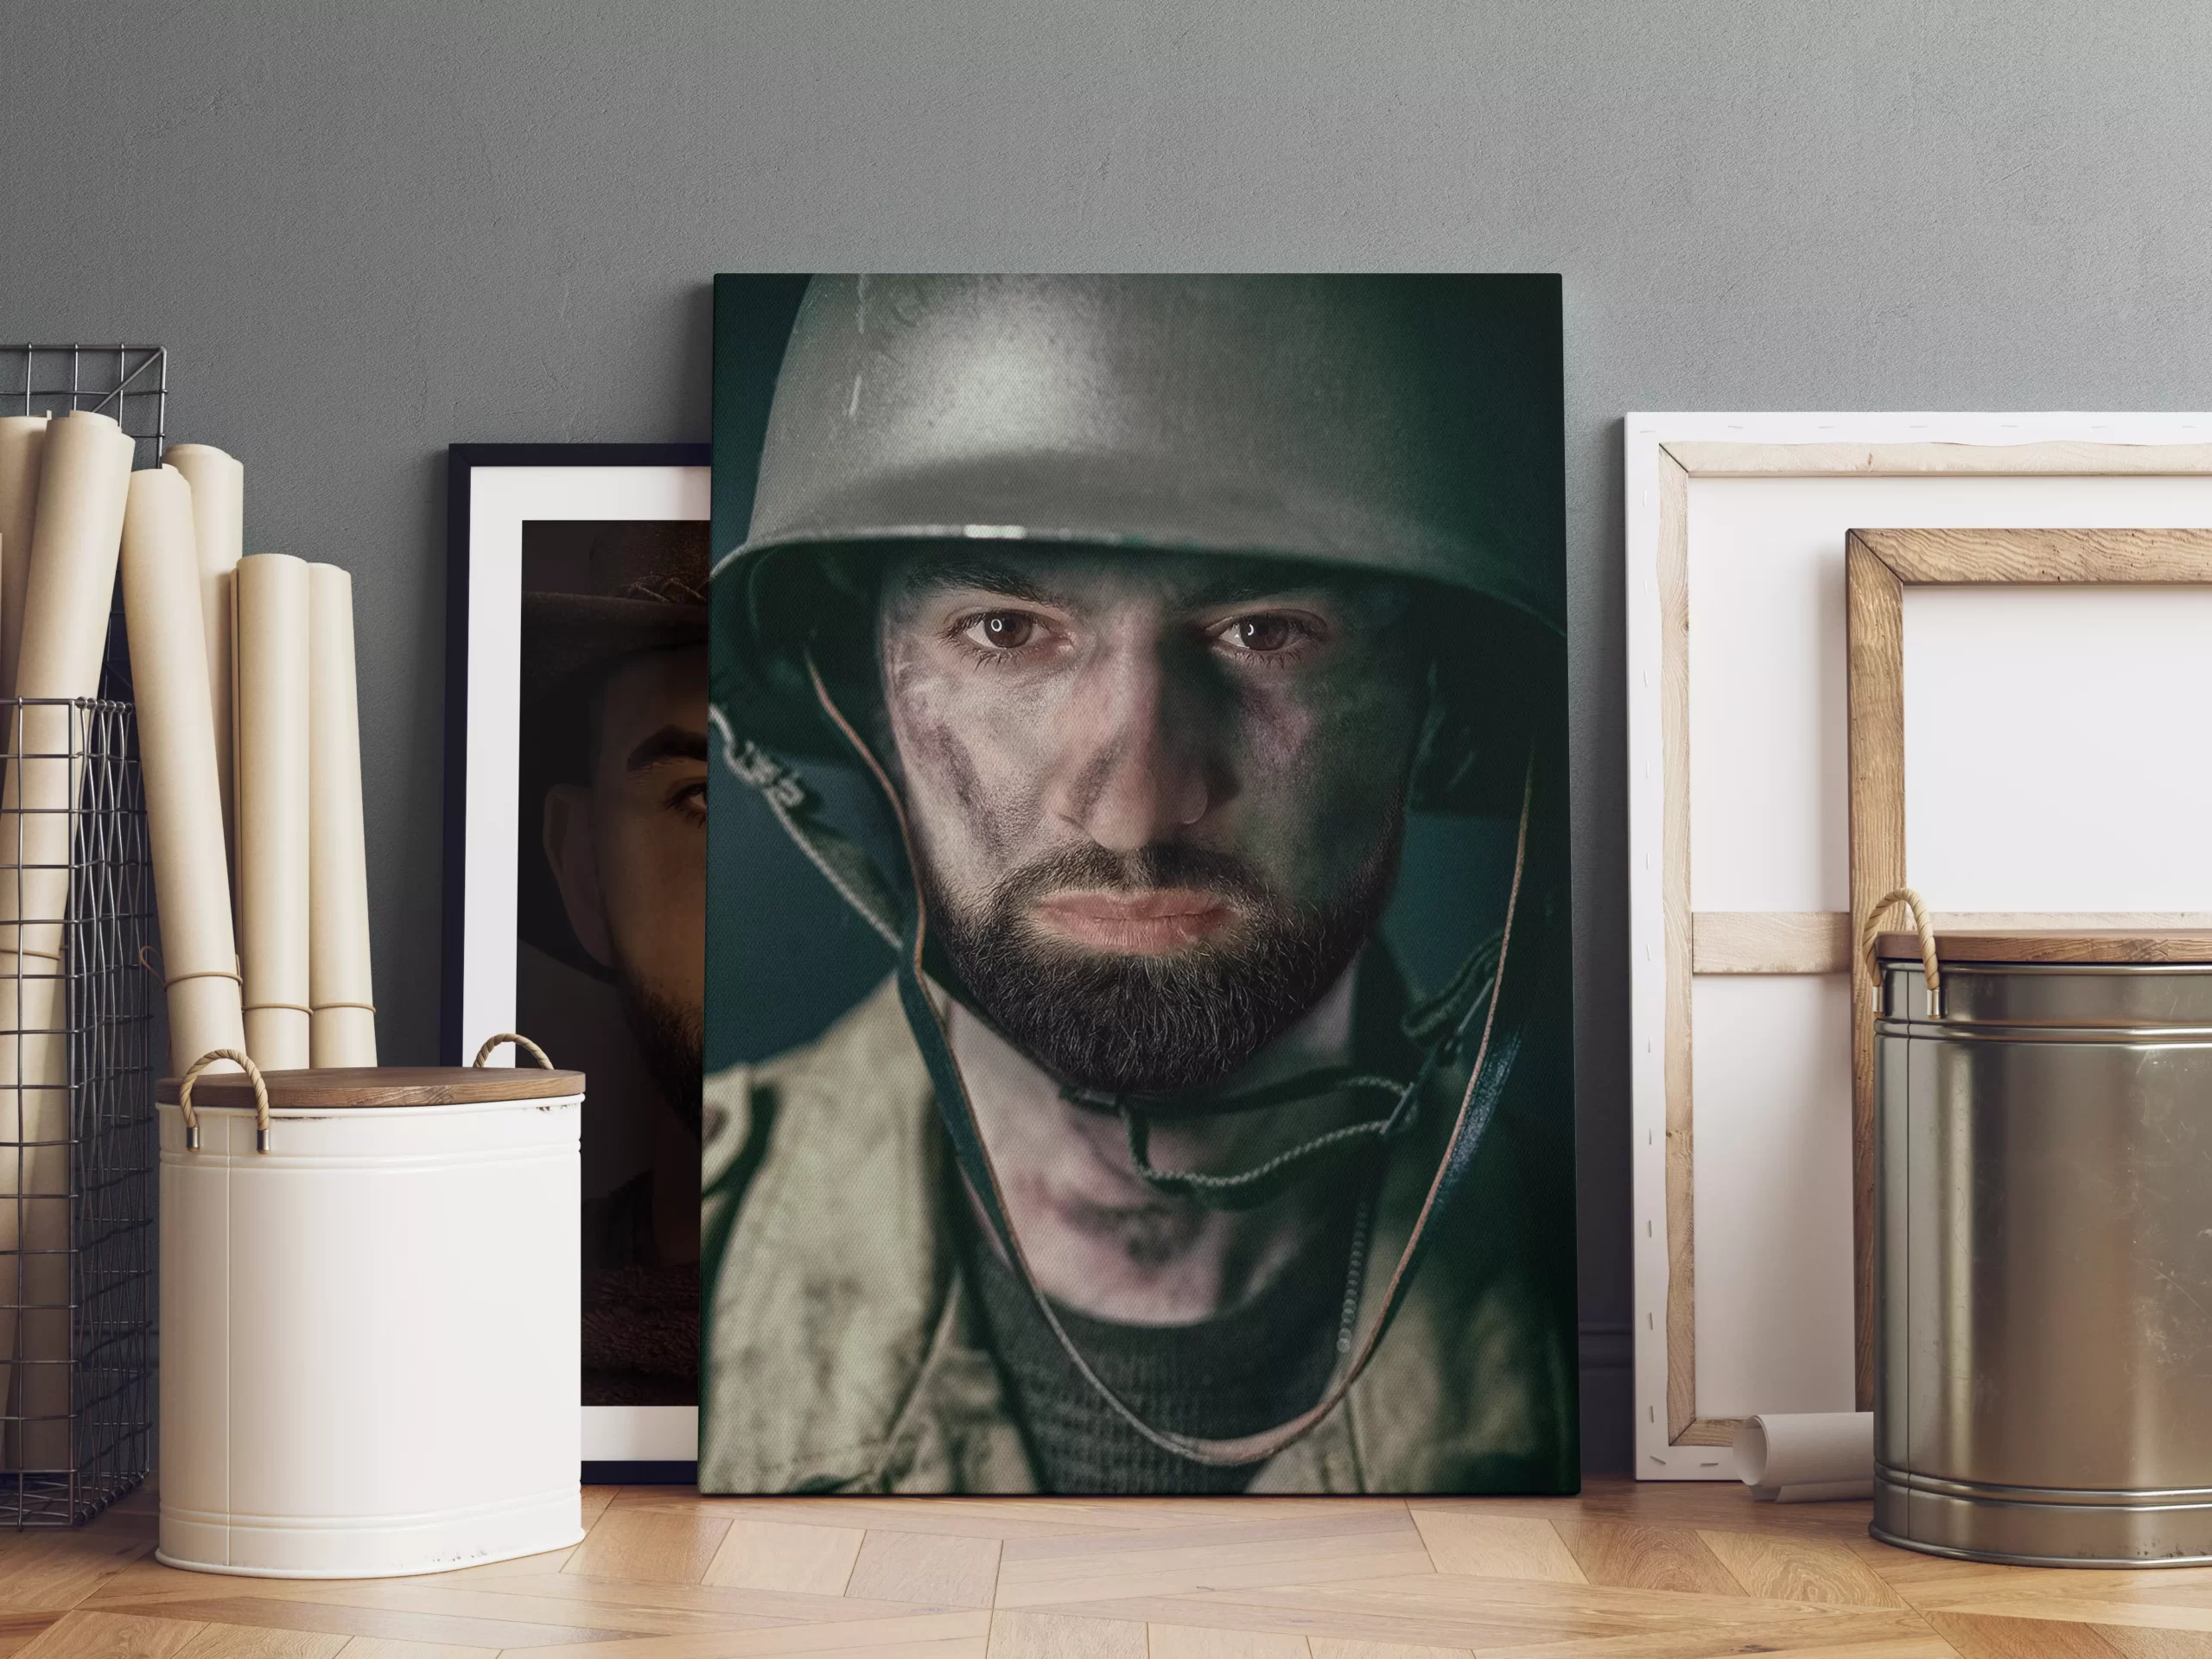 photoshop | solider | sniper | compositing